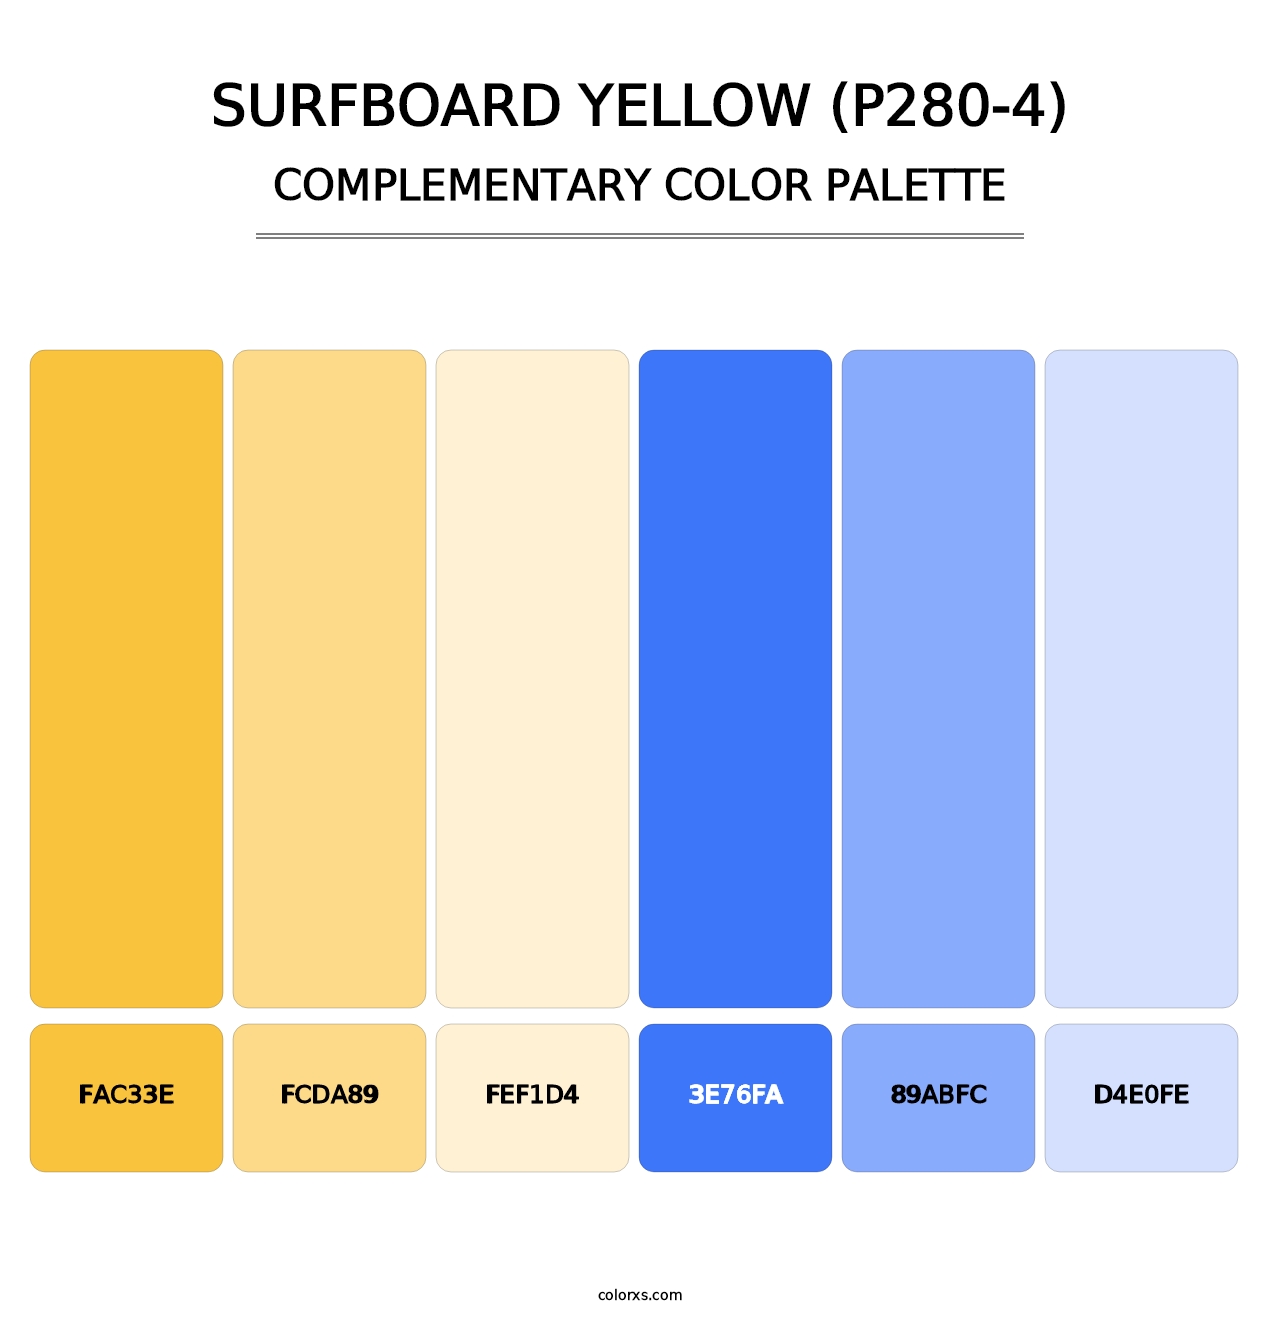 Surfboard Yellow (P280-4) - Complementary Color Palette